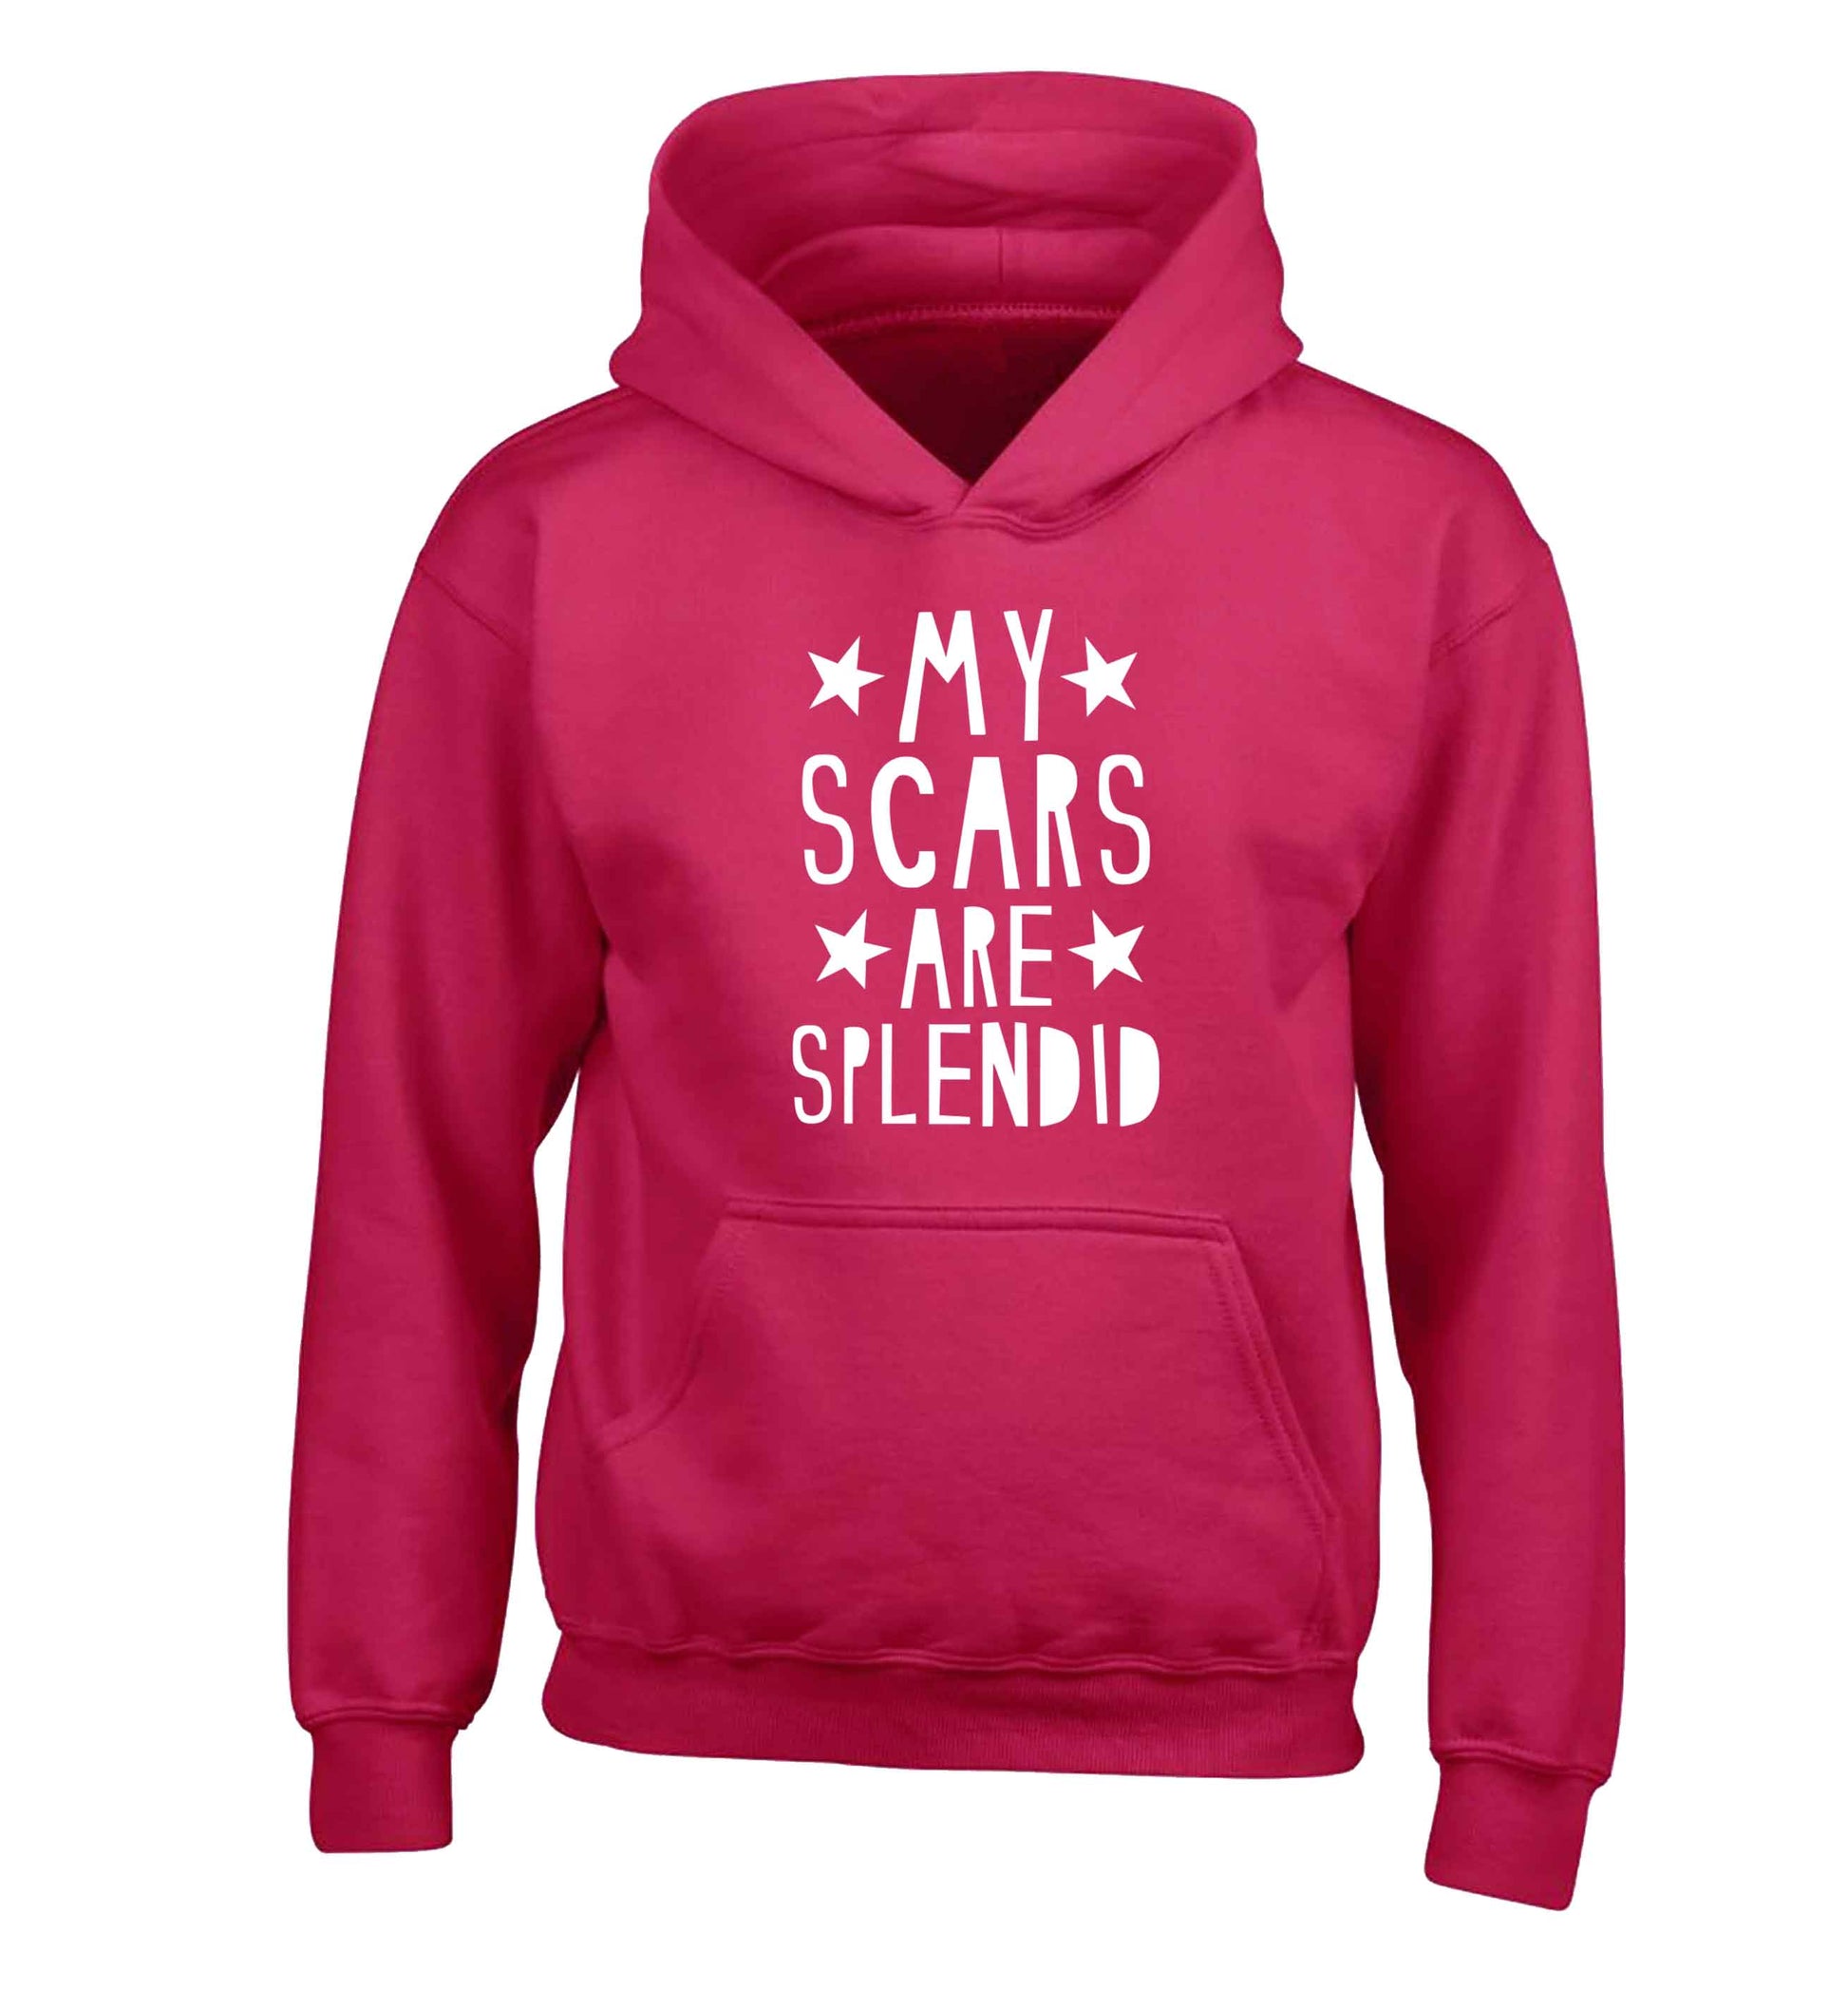 My scars are beautiful children's pink hoodie 12-13 Years